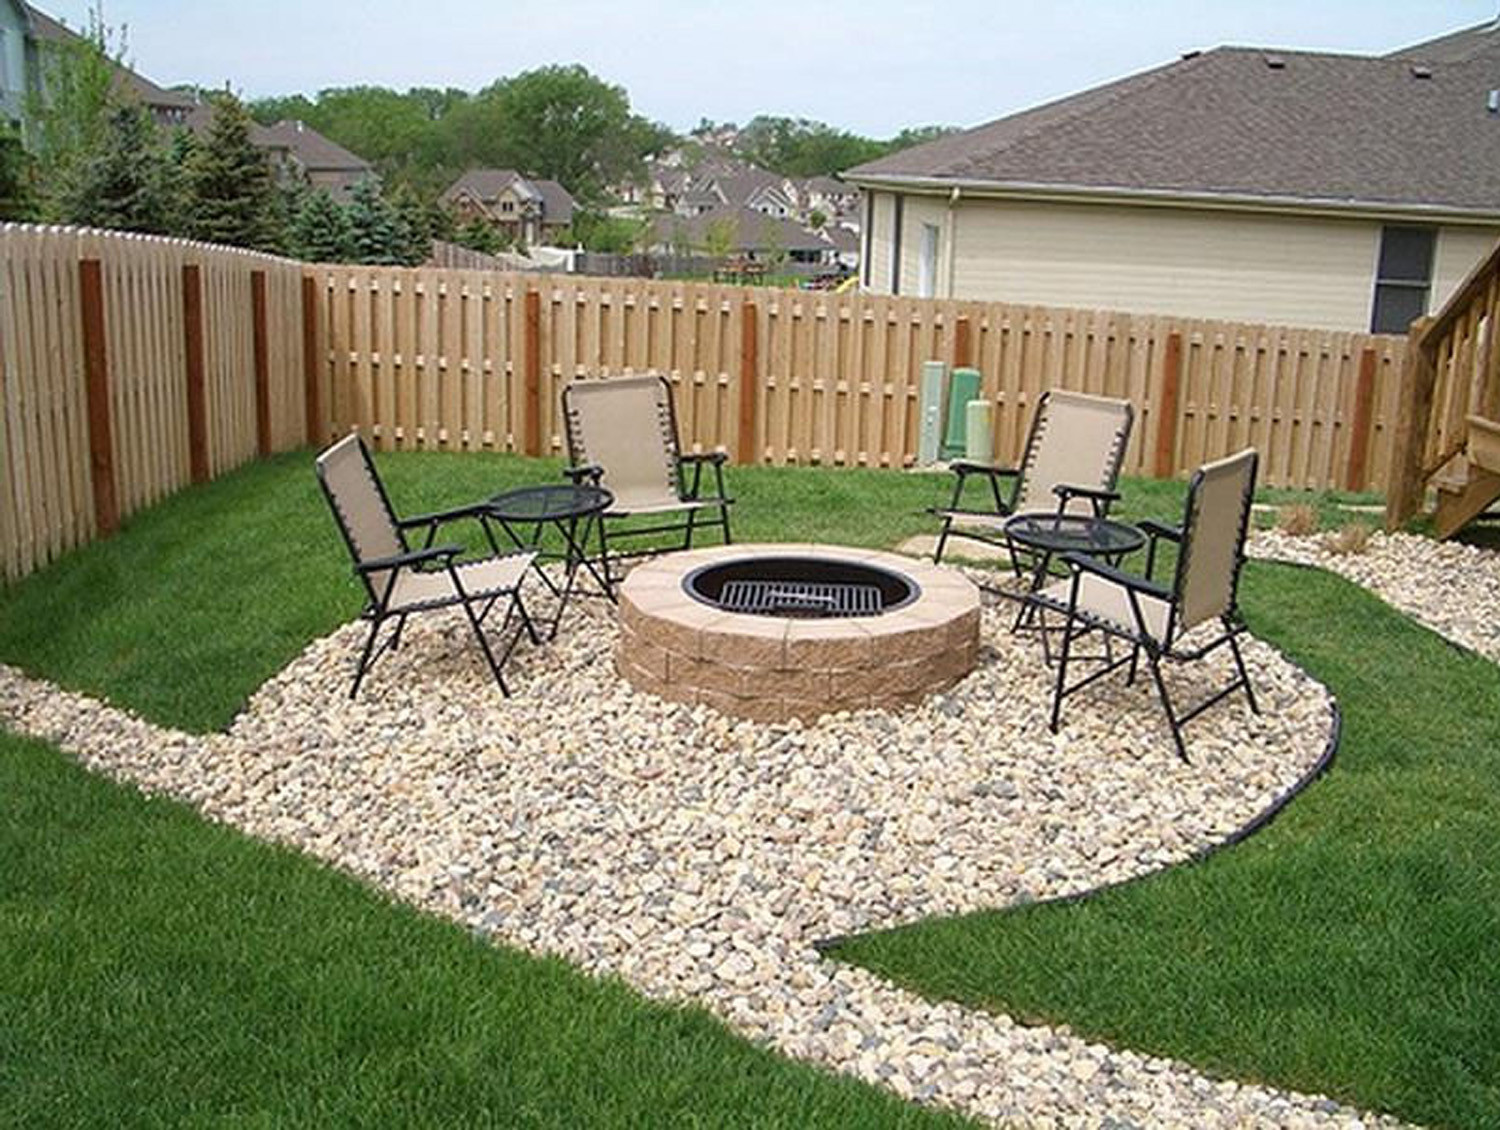 DIY Backyard Patio
 Interesting 17 DIY Fire Pit and Patio Ideas to Try